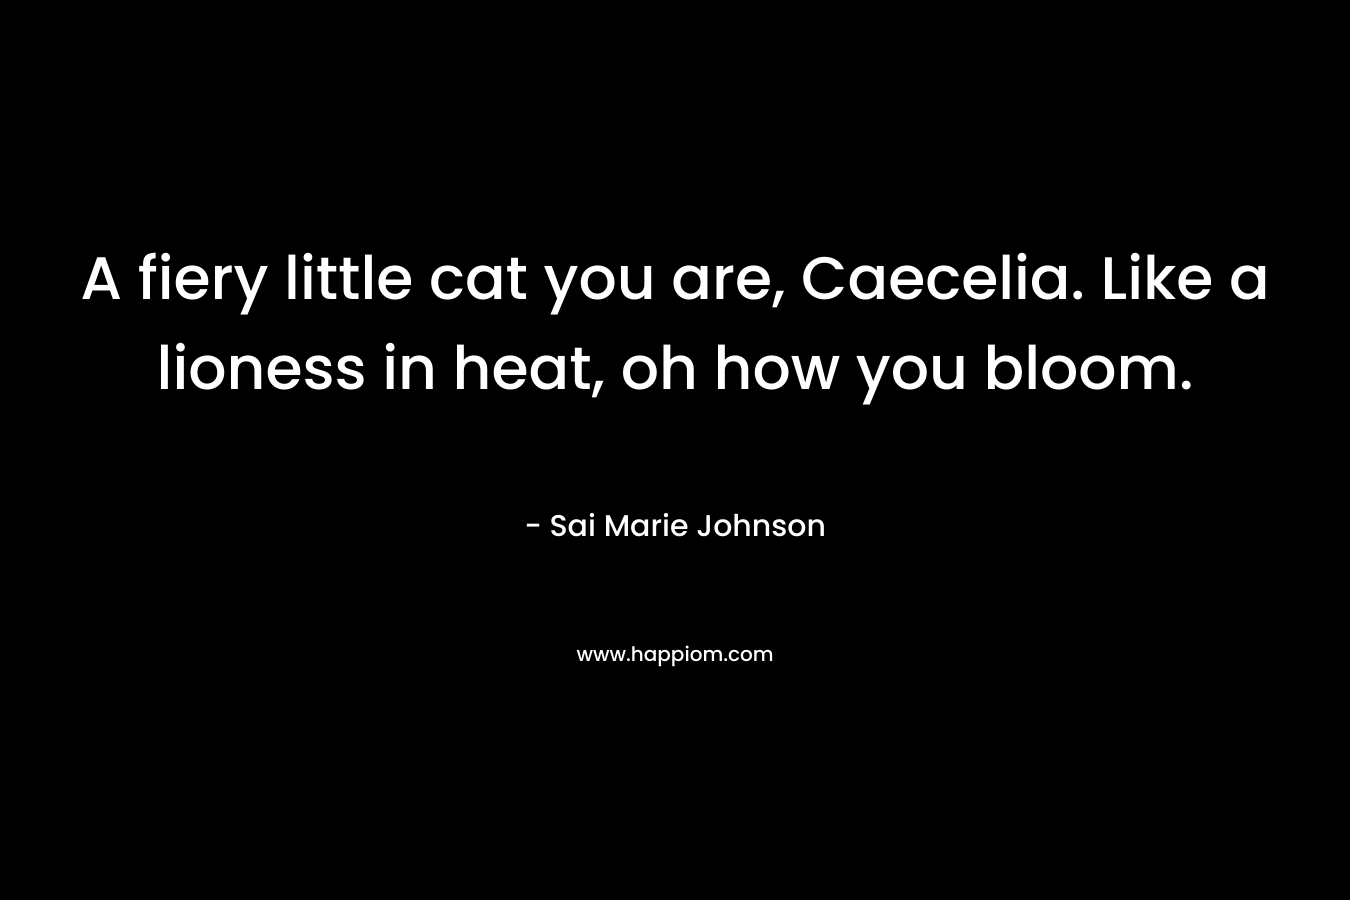 A fiery little cat you are, Caecelia. Like a lioness in heat, oh how you bloom. – Sai Marie Johnson